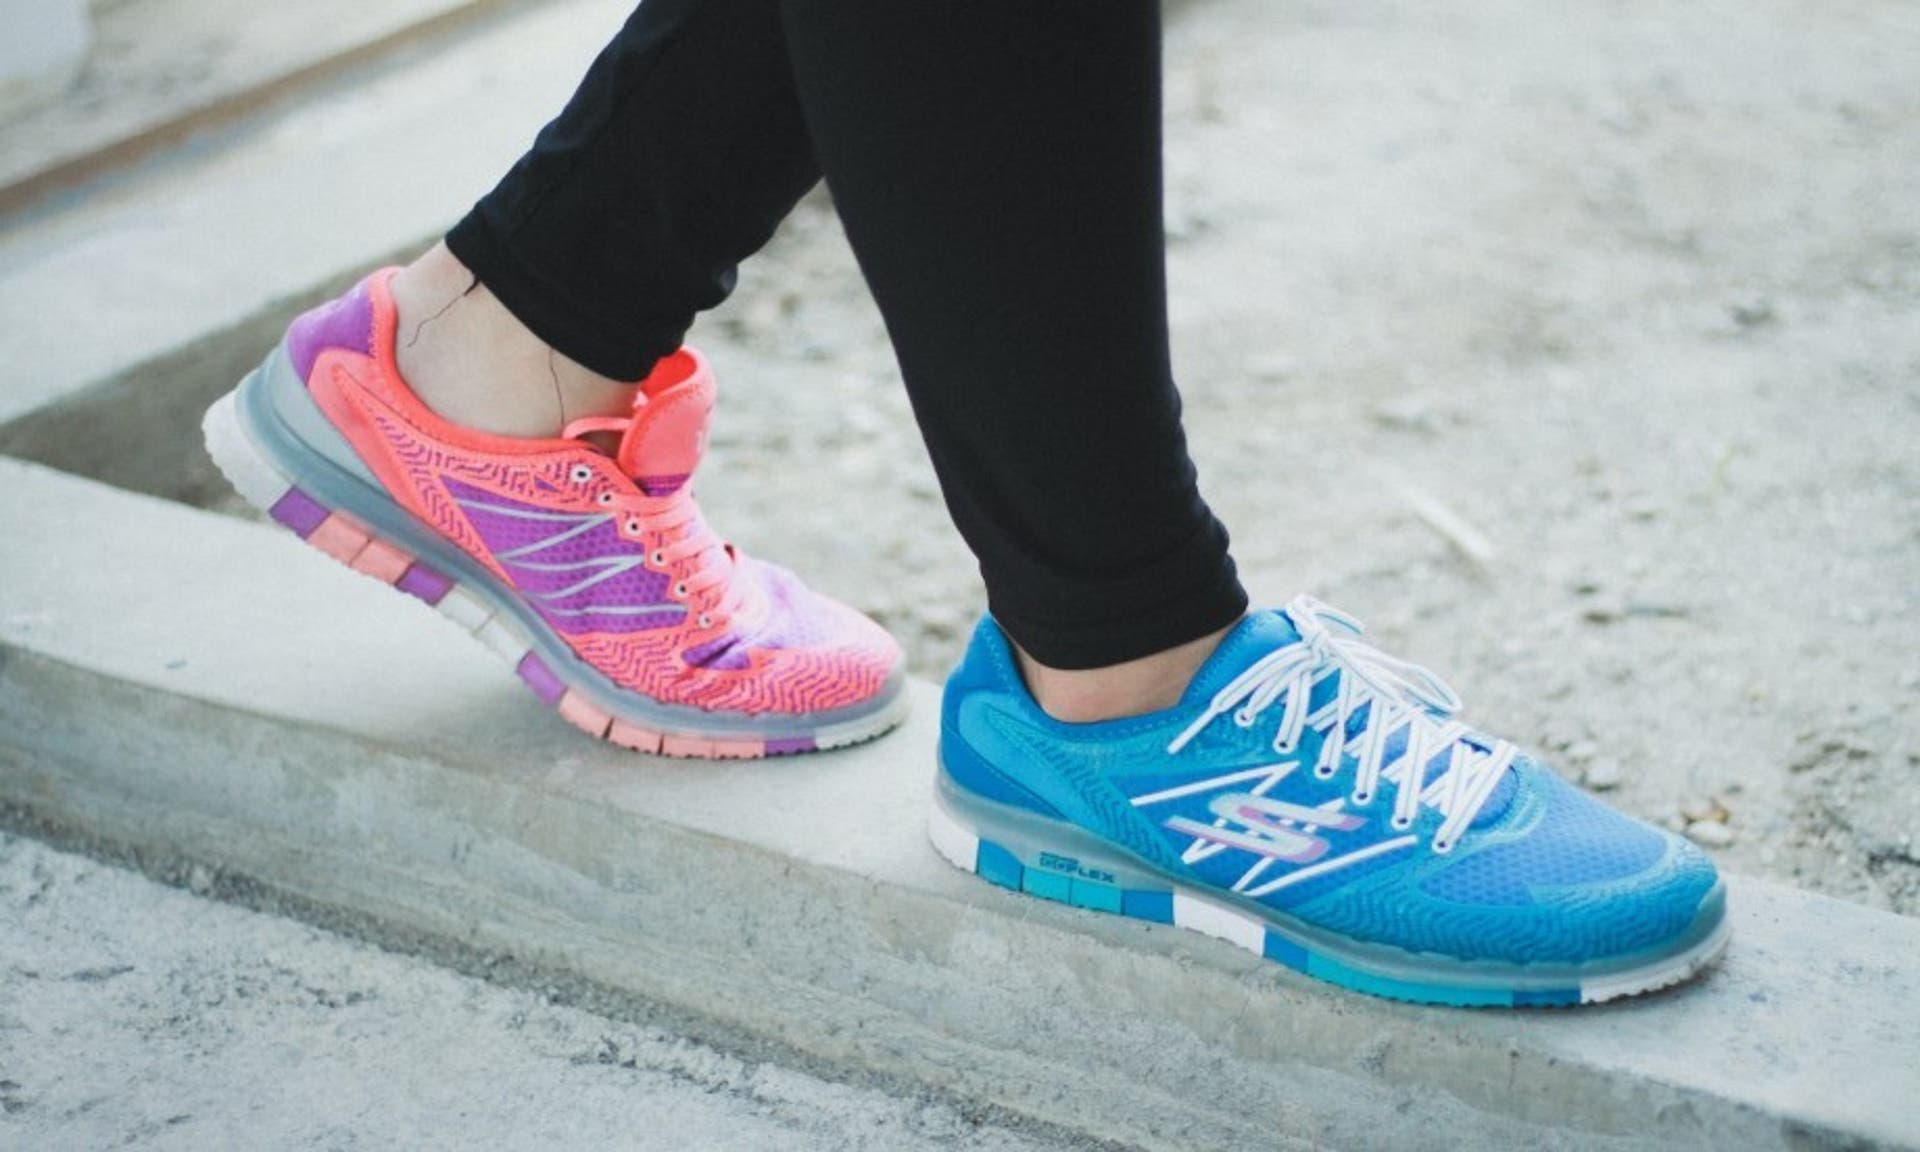  skechers trains in light blue and pink 